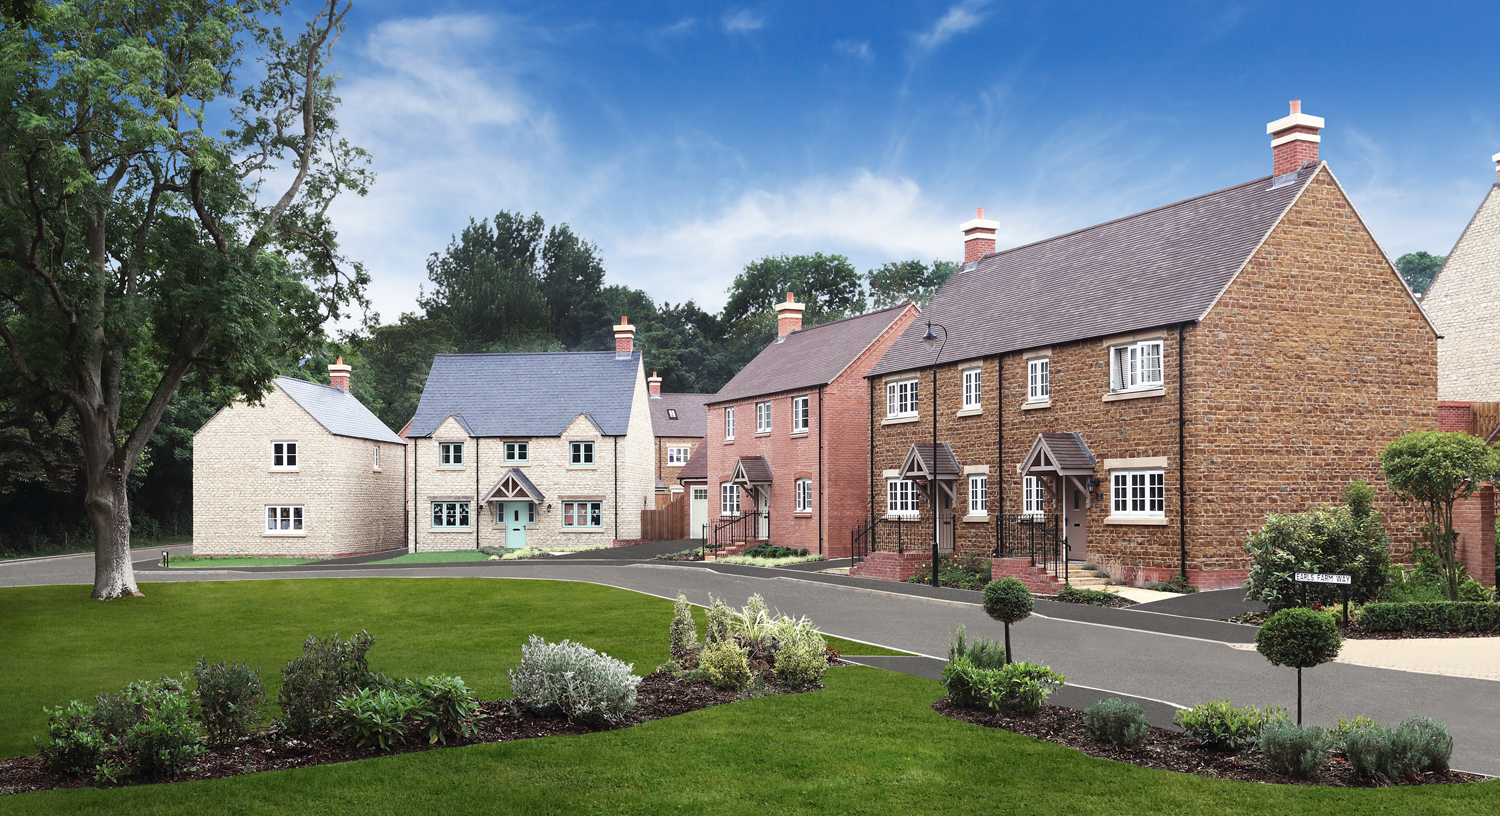 1 000 Redrow Homes Planned In Oxfordshire Phpd Online